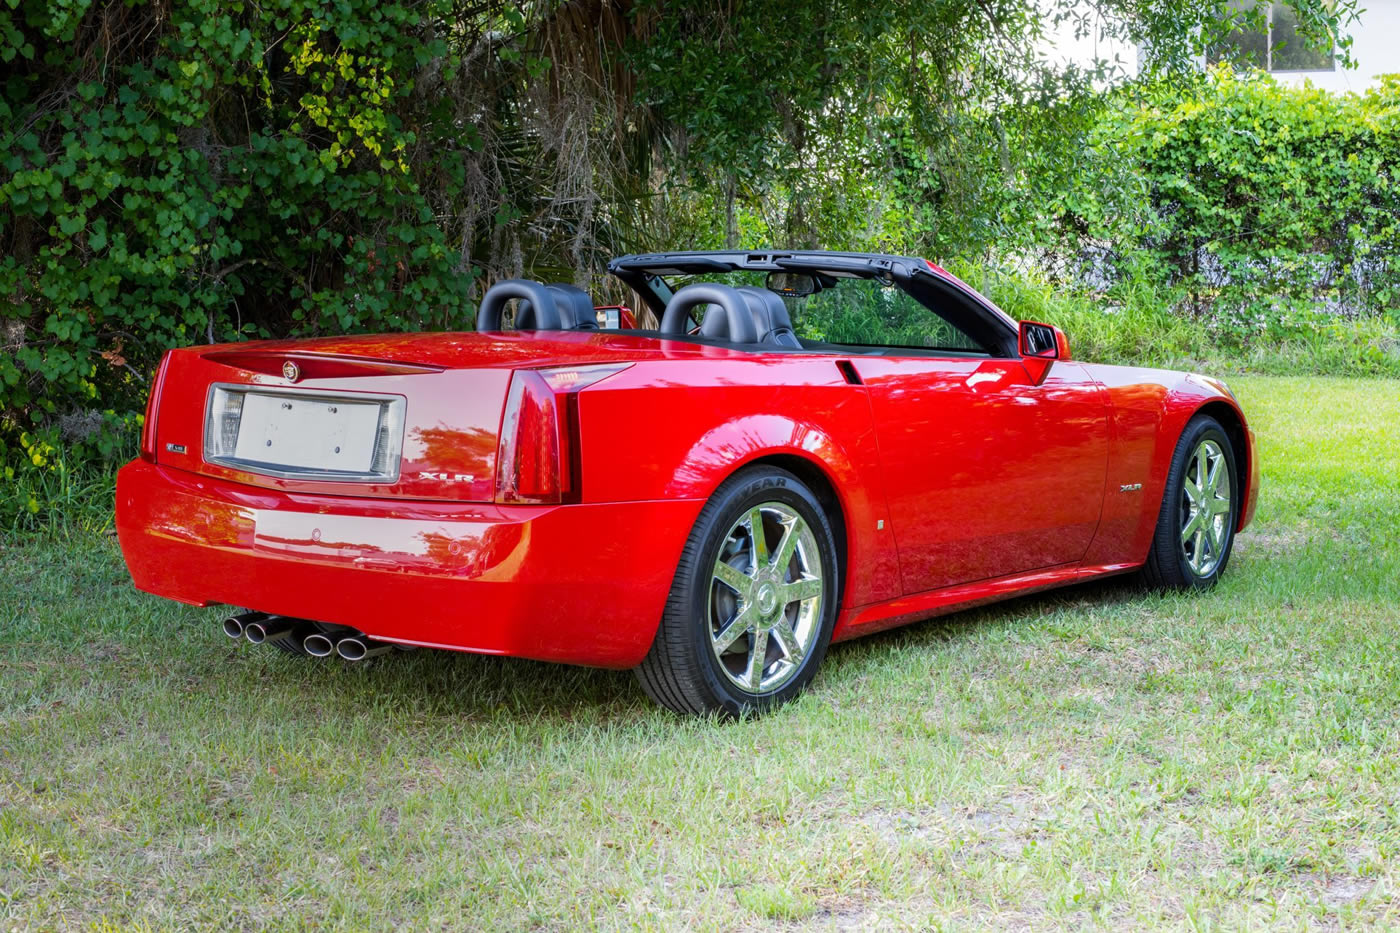 2007 Cadillac XLR Passion Red Limited Edition Number 131